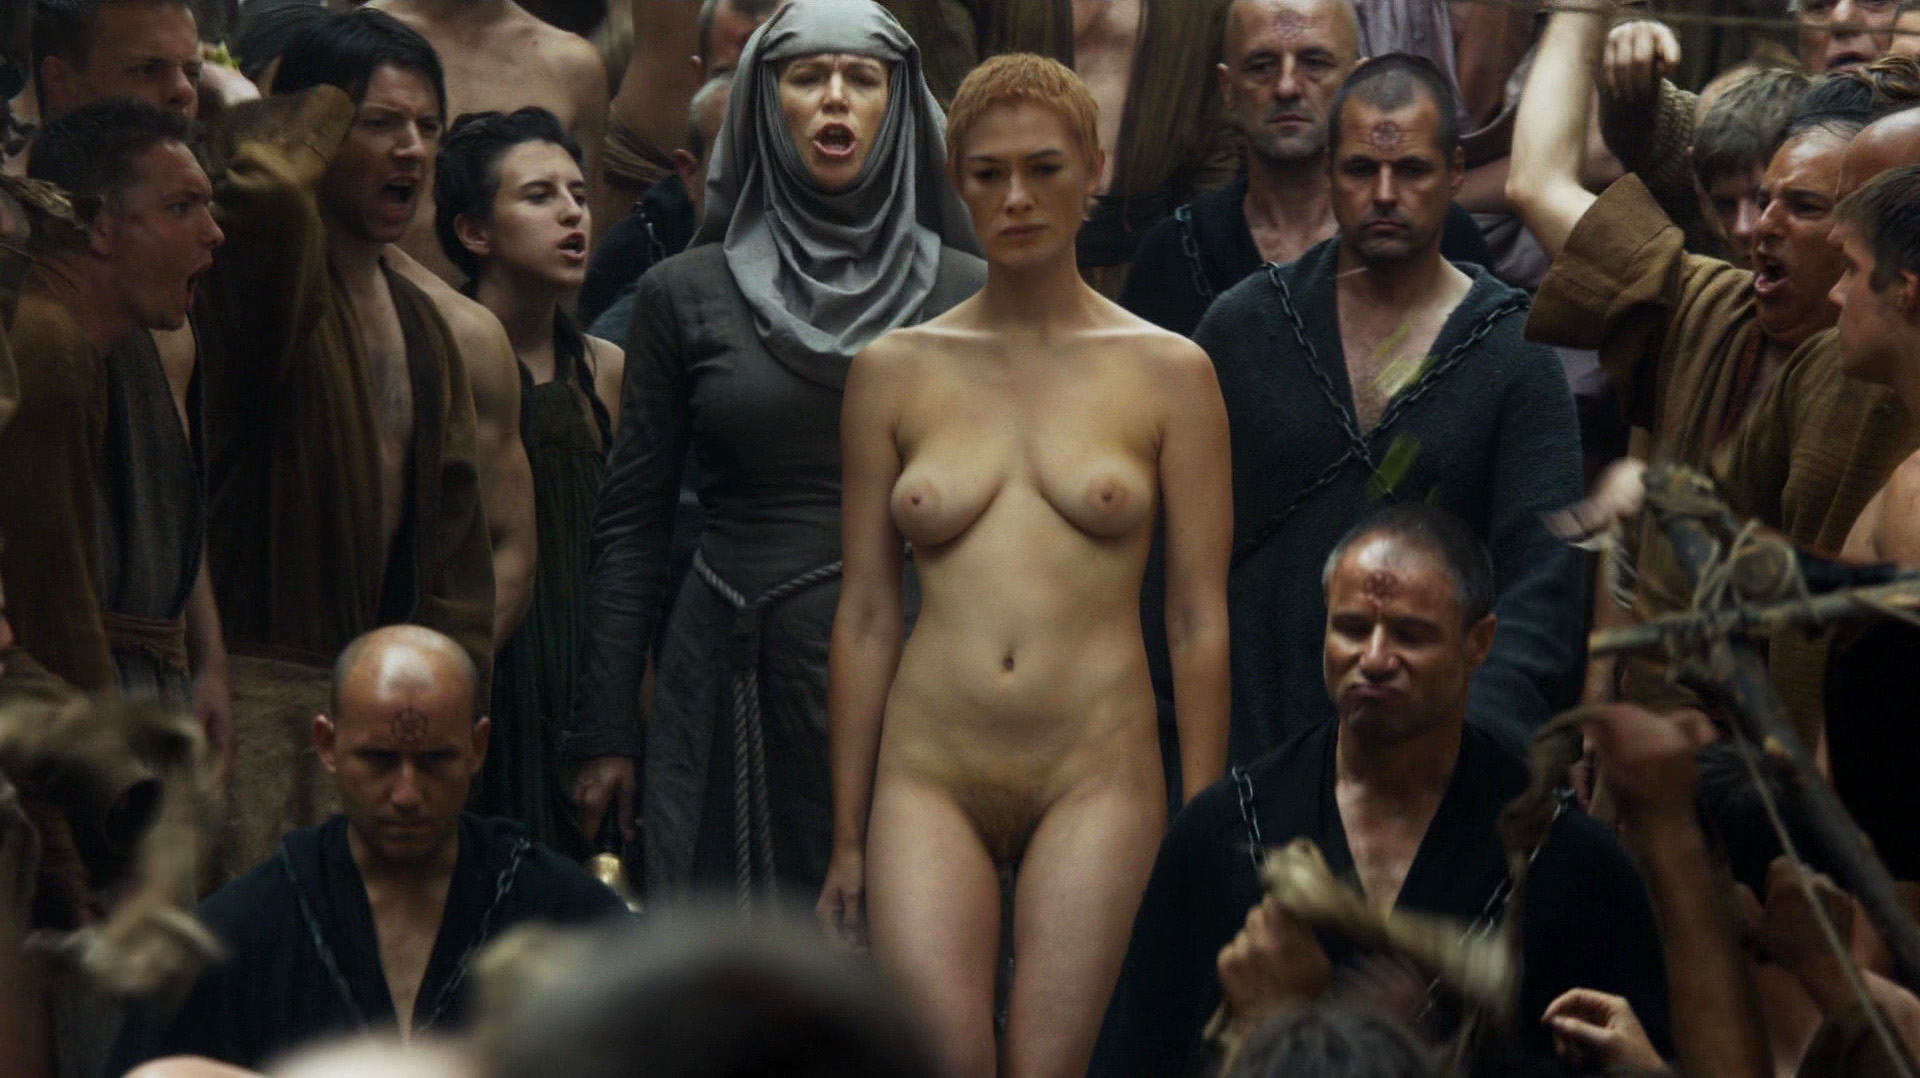 alyson oliveira reccomend naked pics from game of thrones pic